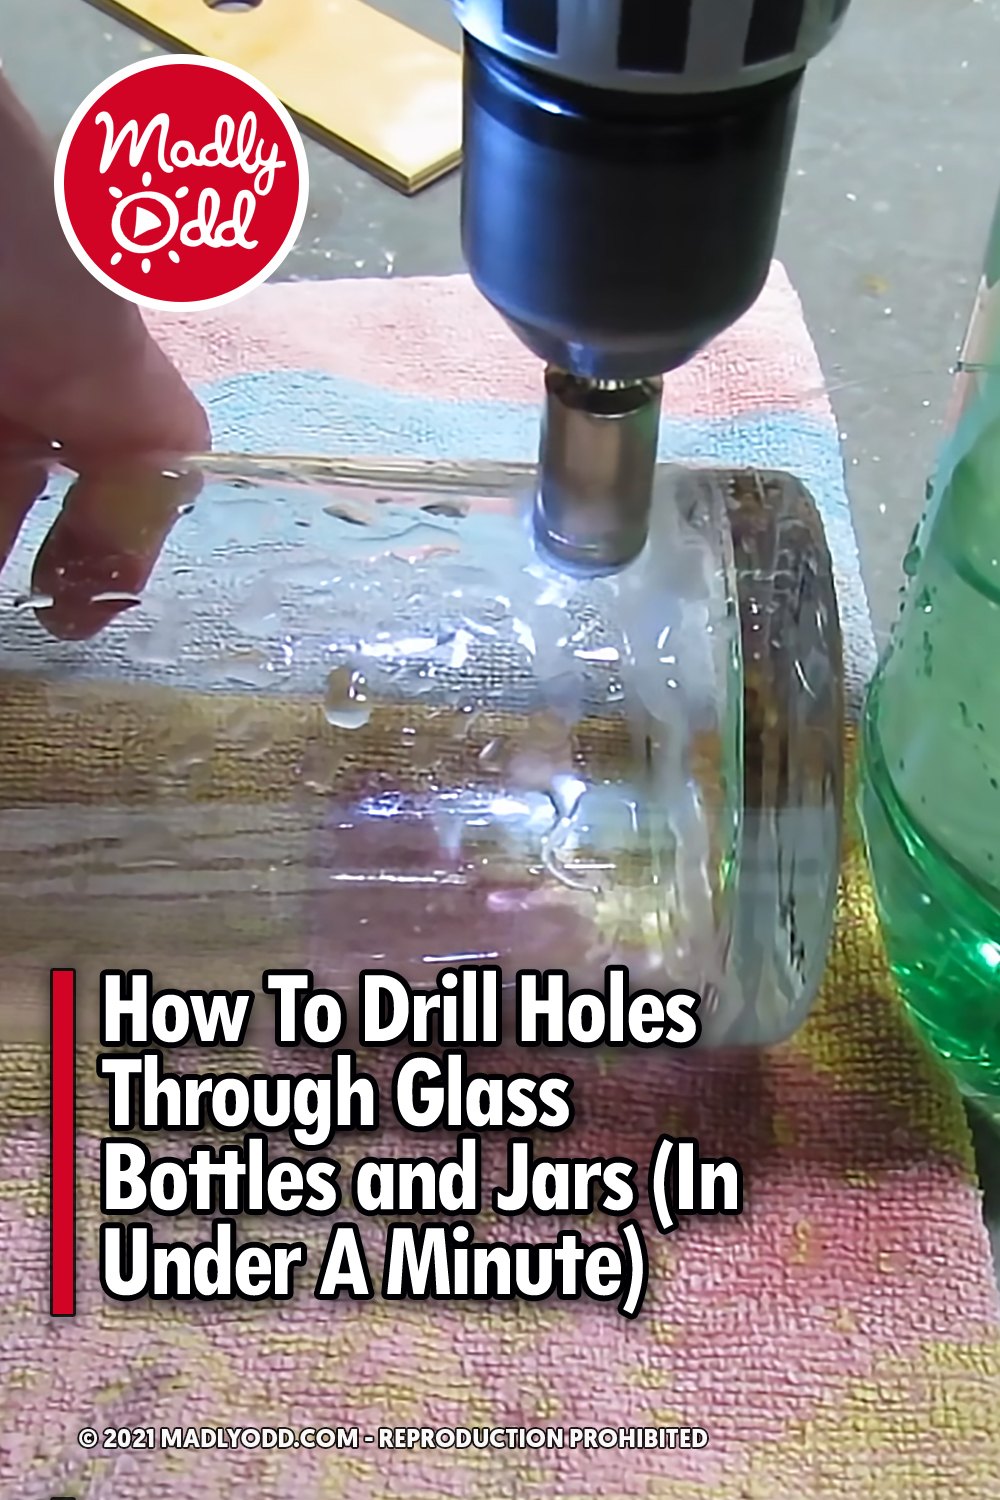 How To Drill Holes Through Glass Bottles and Jars (In Under A Minute)